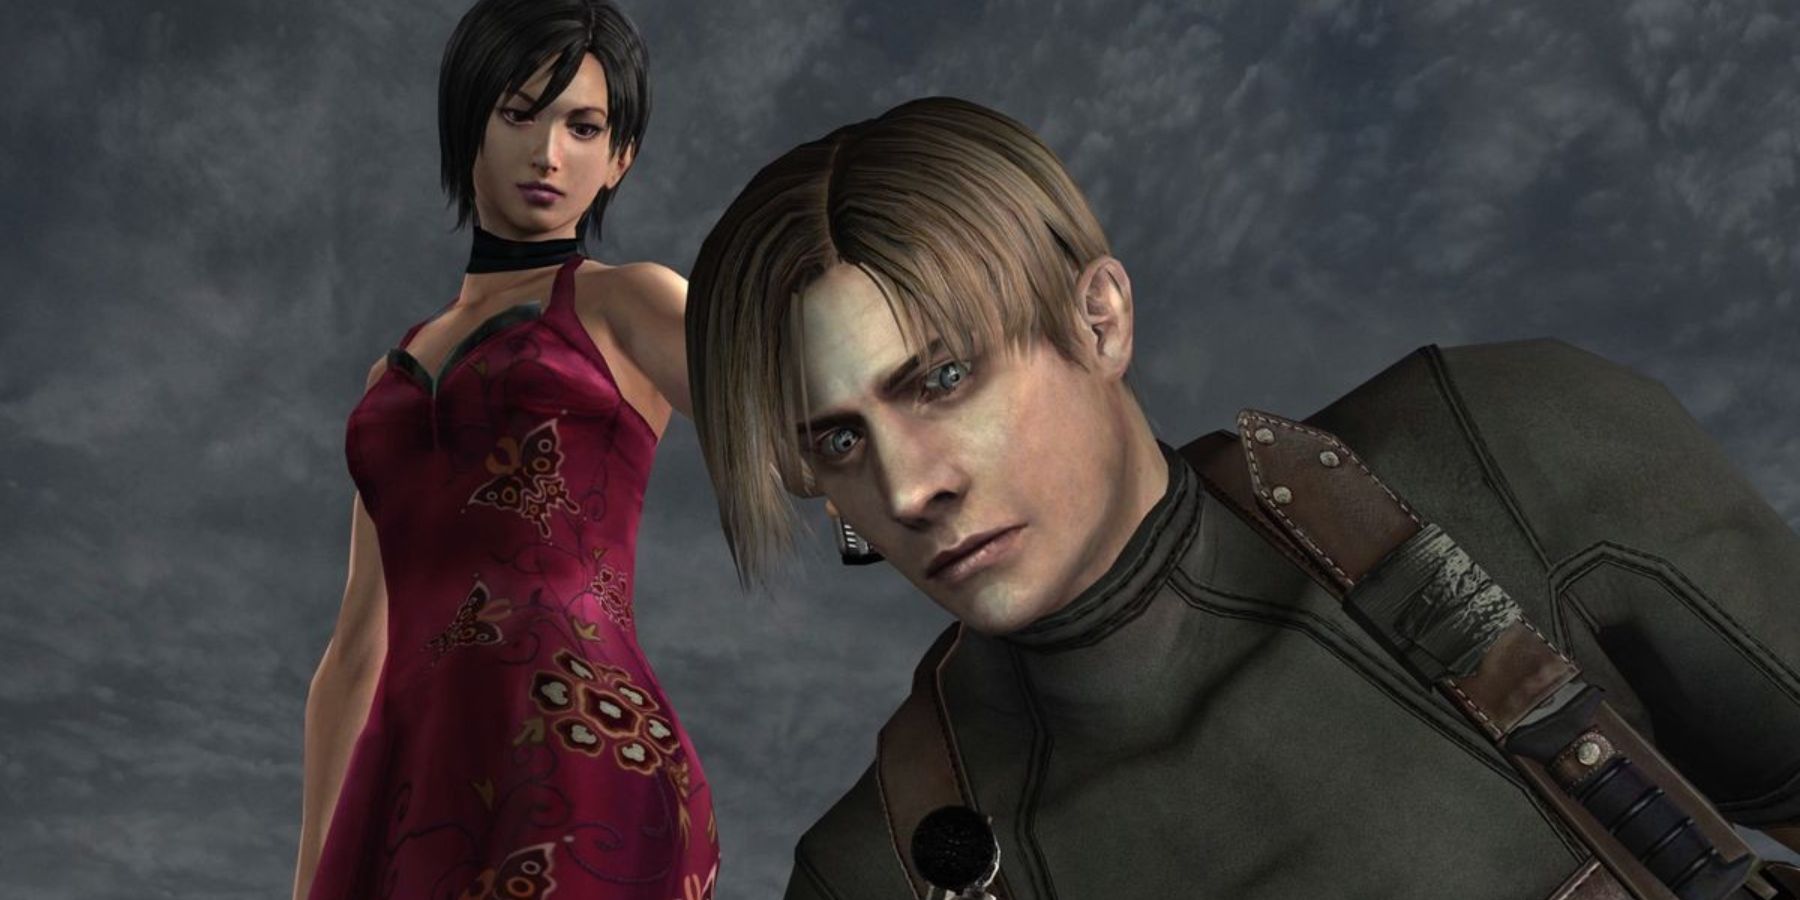 Resident Evil 4 Remake Has Been Teased or Leaked So Much That It Has to be Real